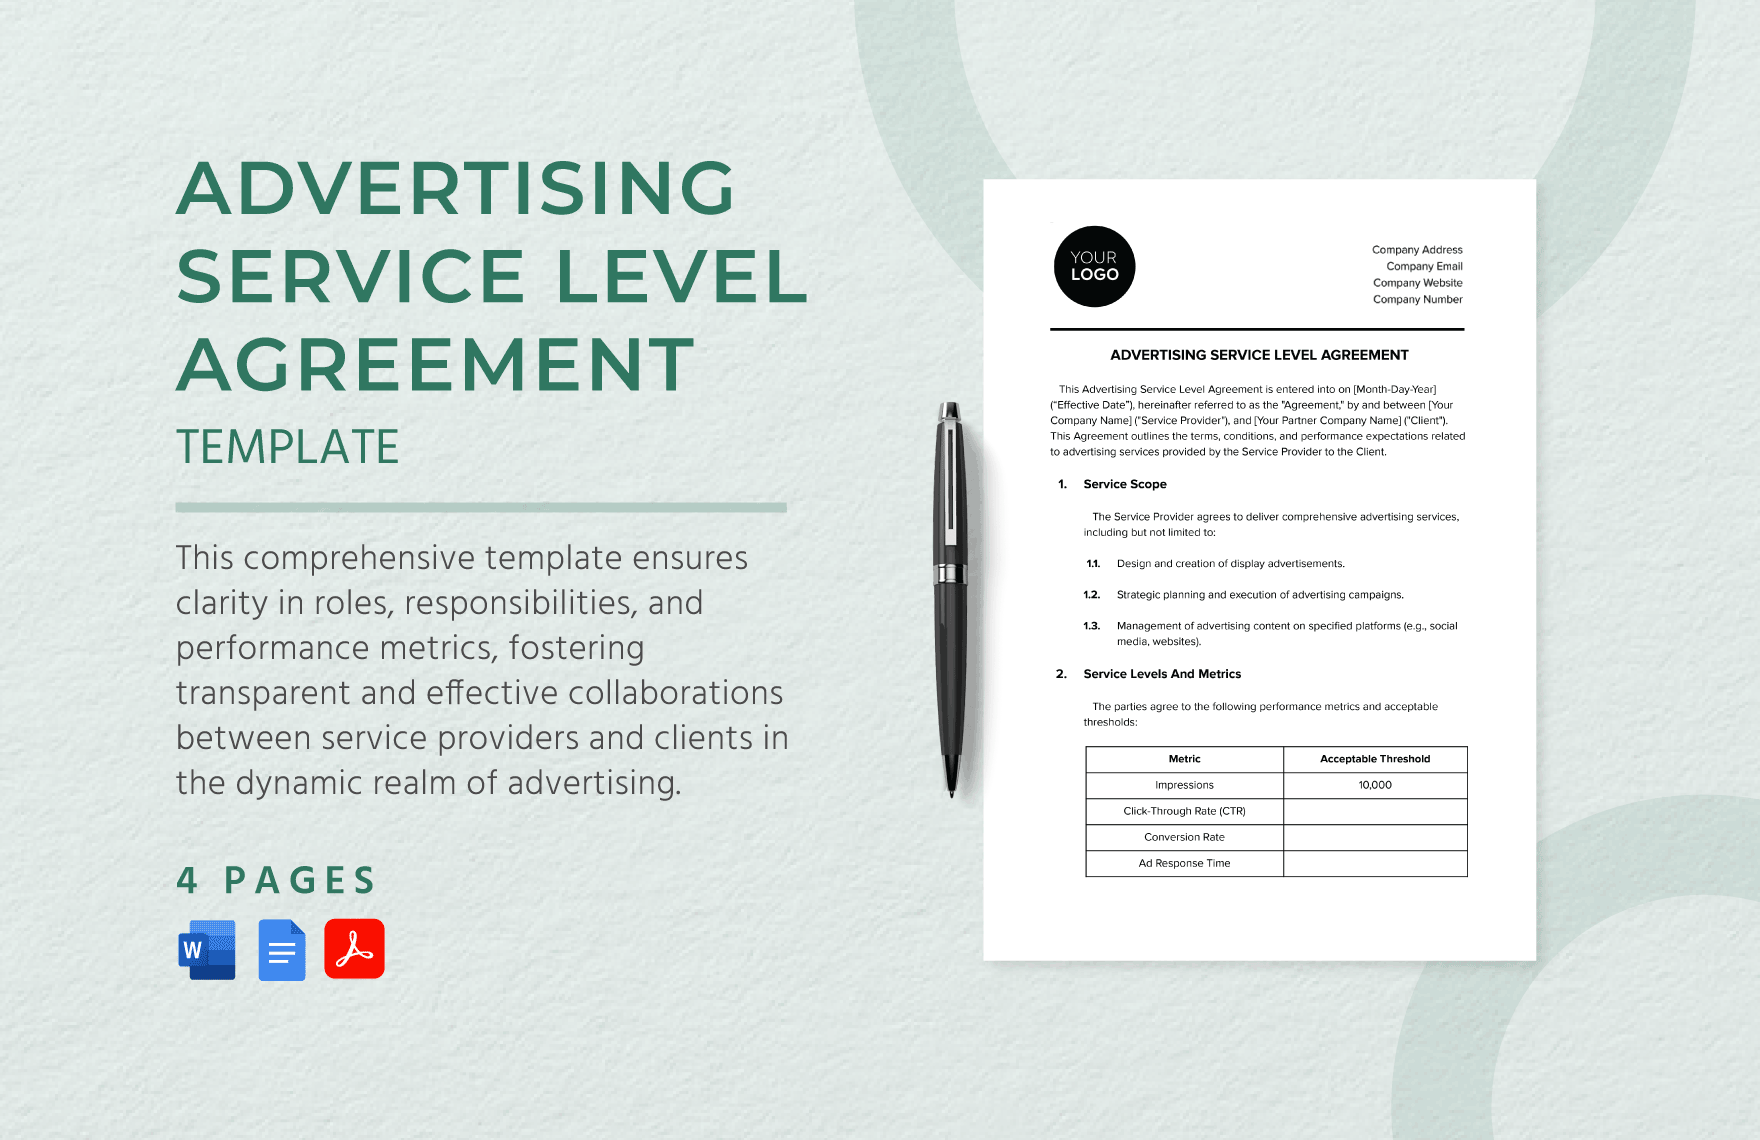 Advertising Service Level Agreement Template in Word, Google Docs, PDF